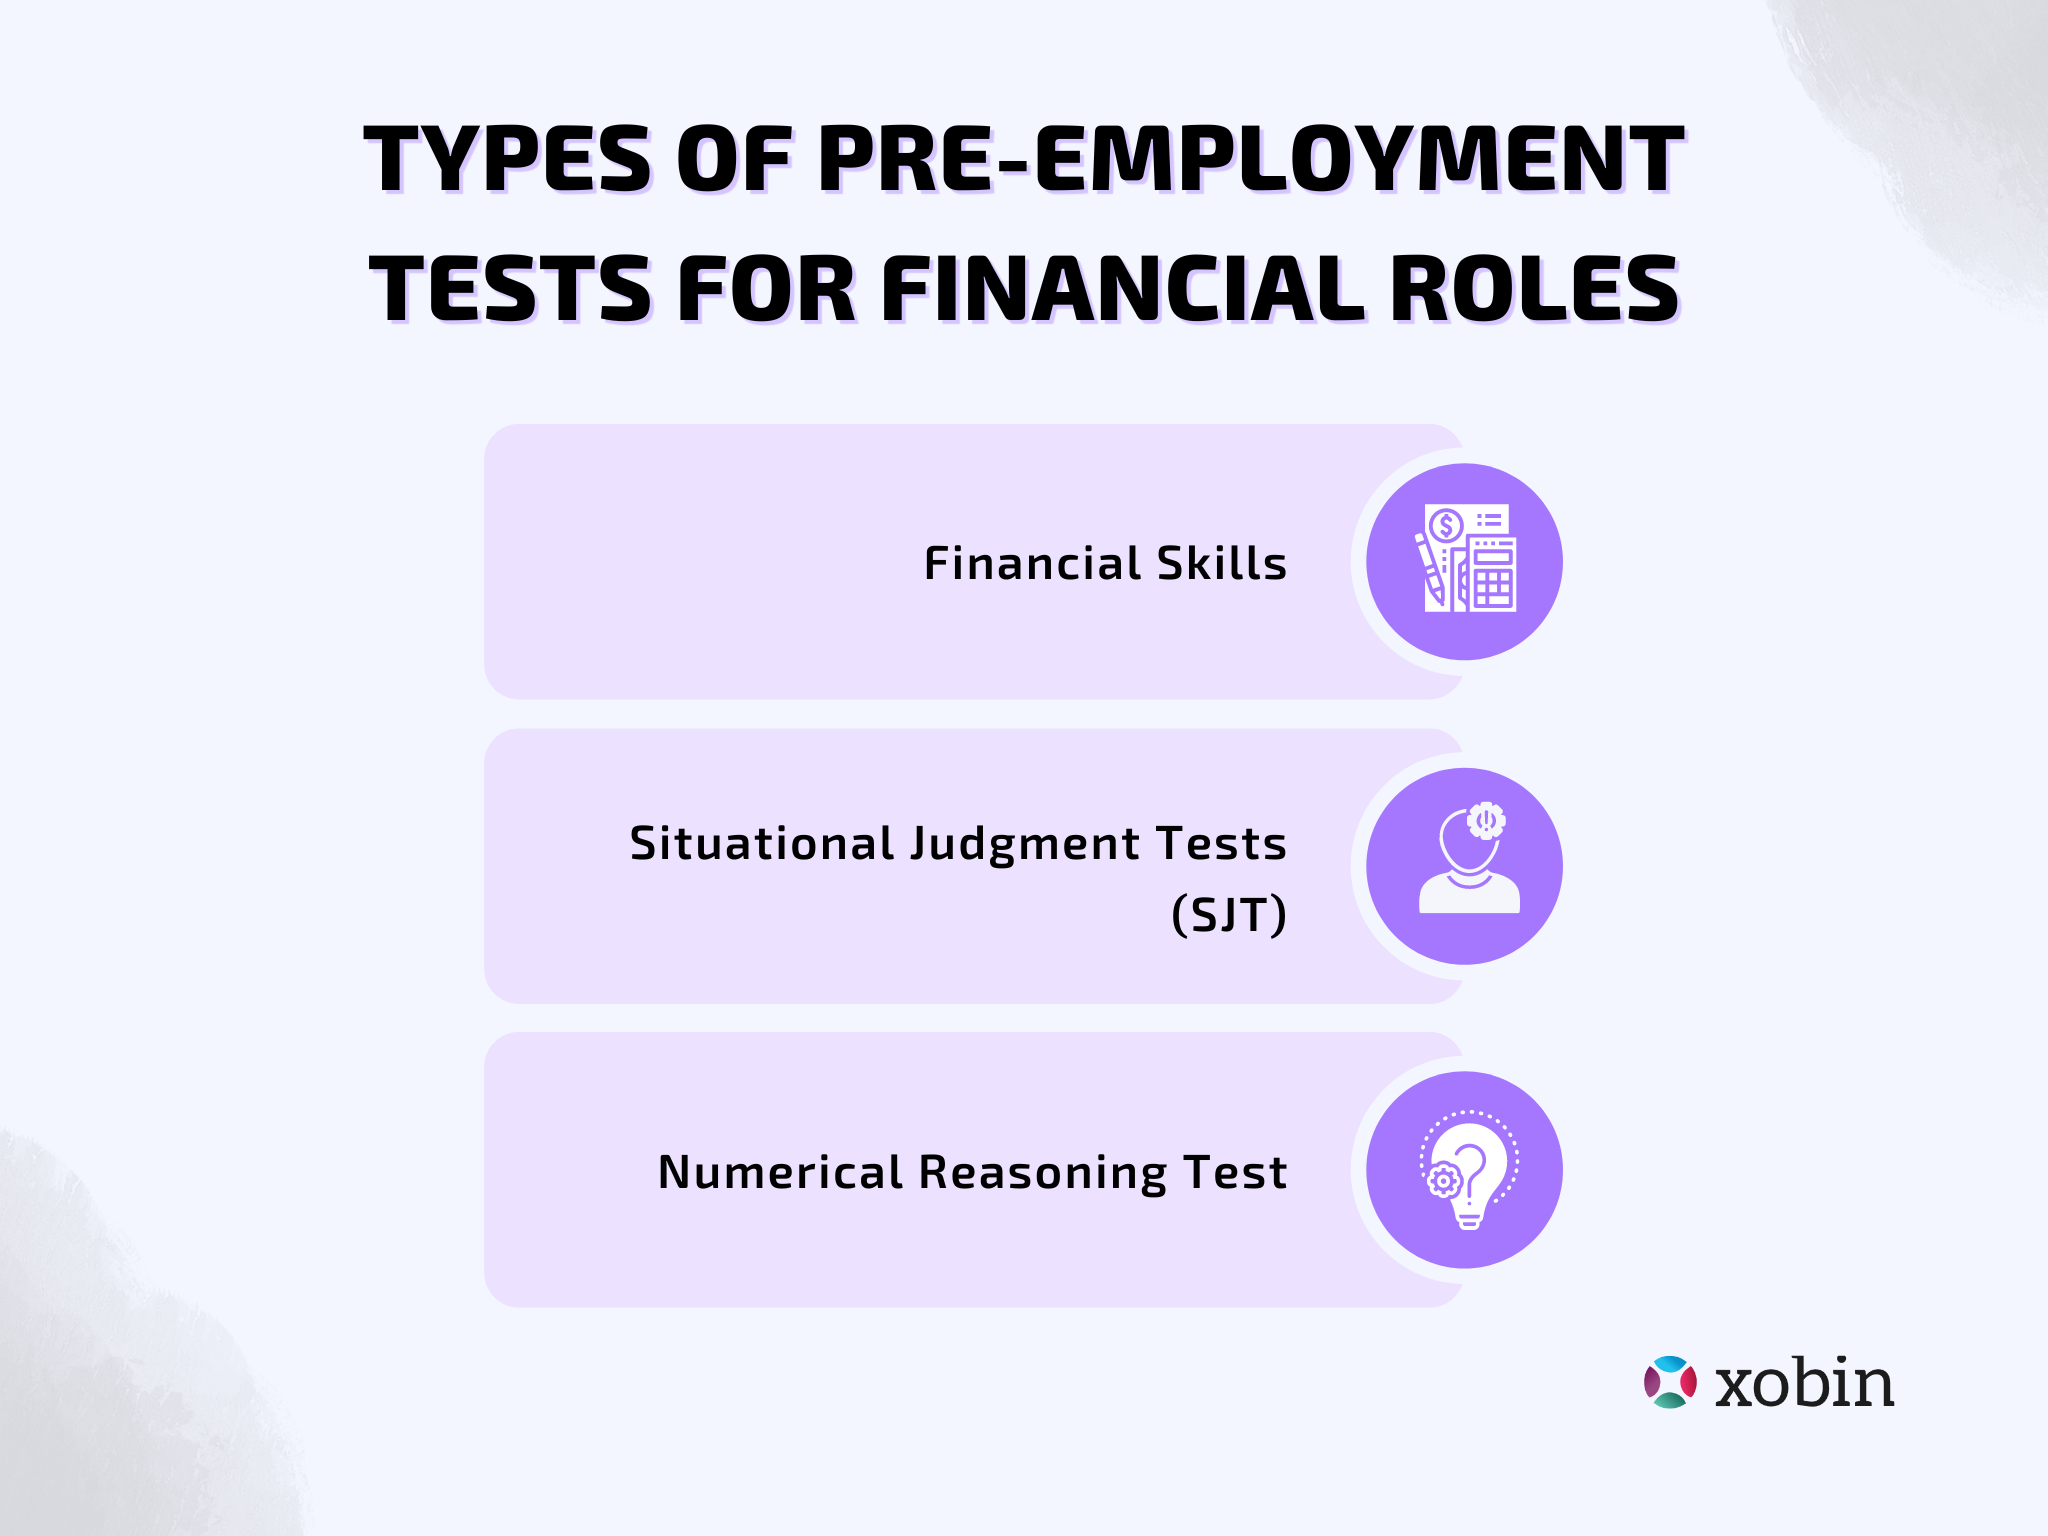 Types of pre-employment tests for financial roles